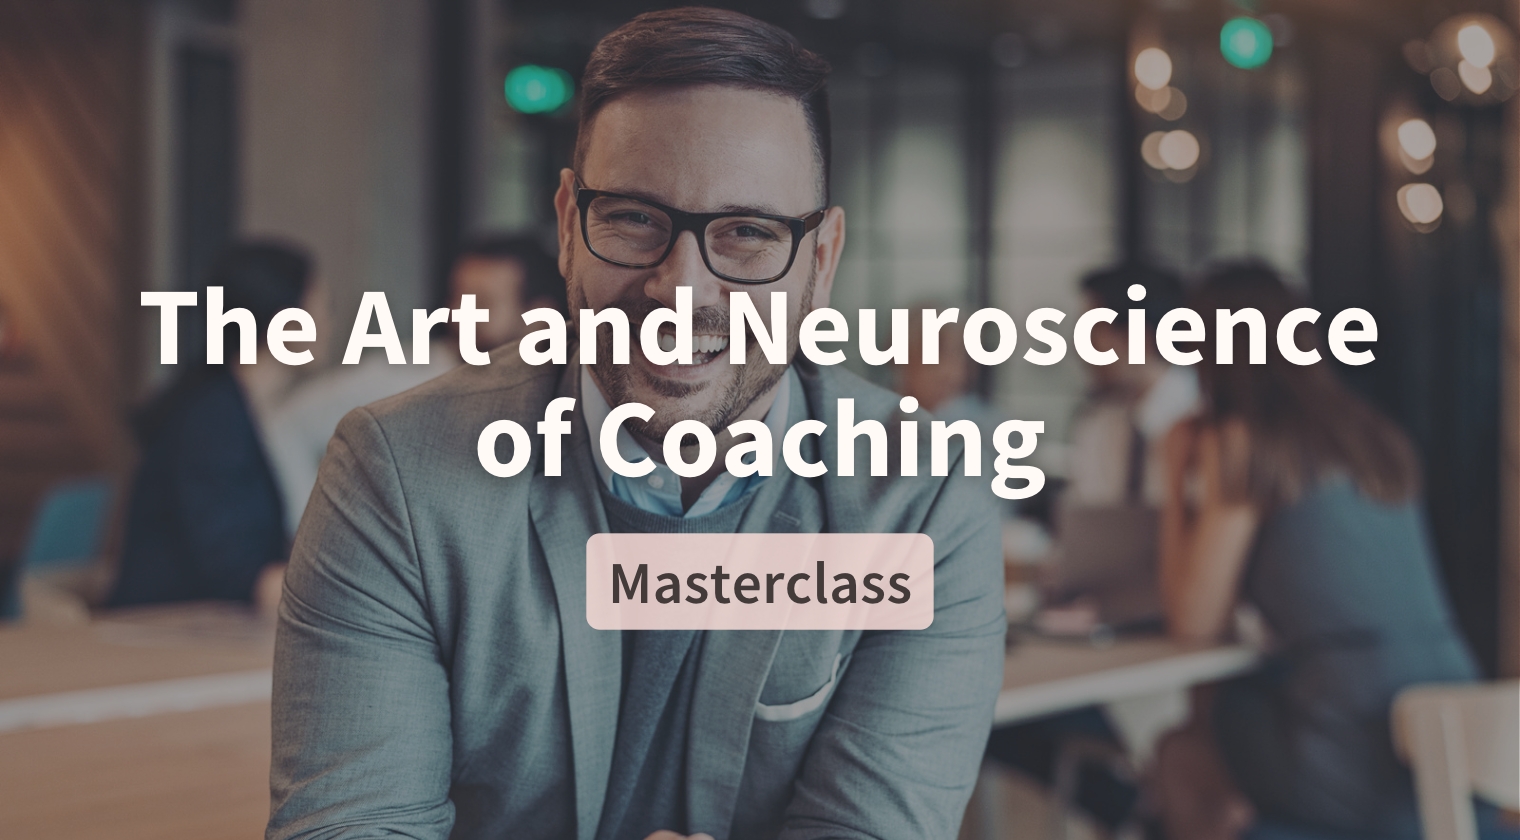 The Art and Neuroscience of Coaching